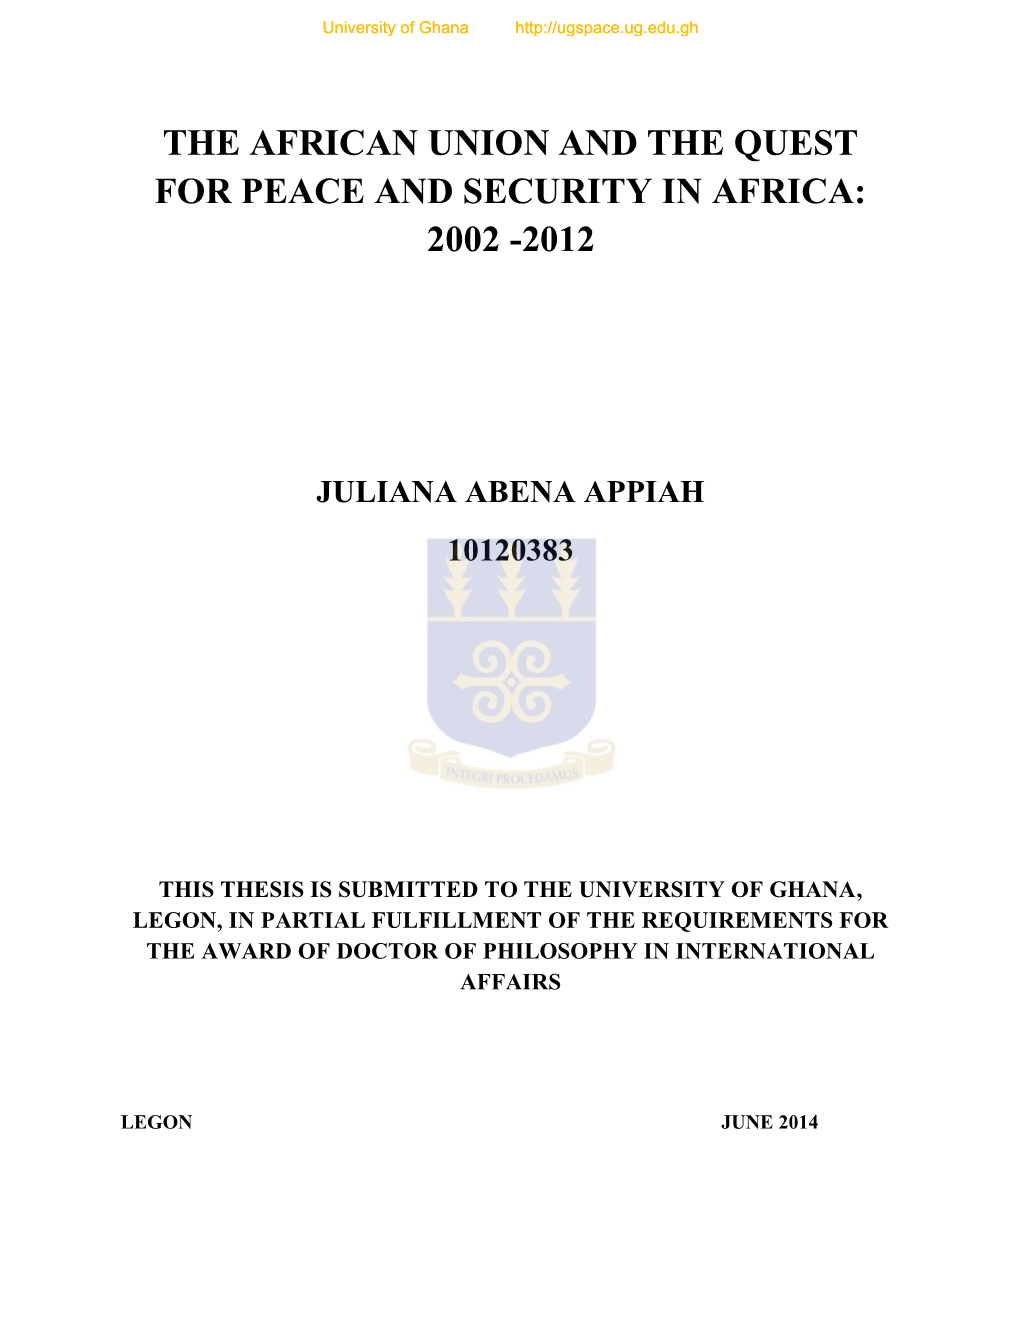 The African Union and the Quest for Peace and Security in Africa: 2002 -2012